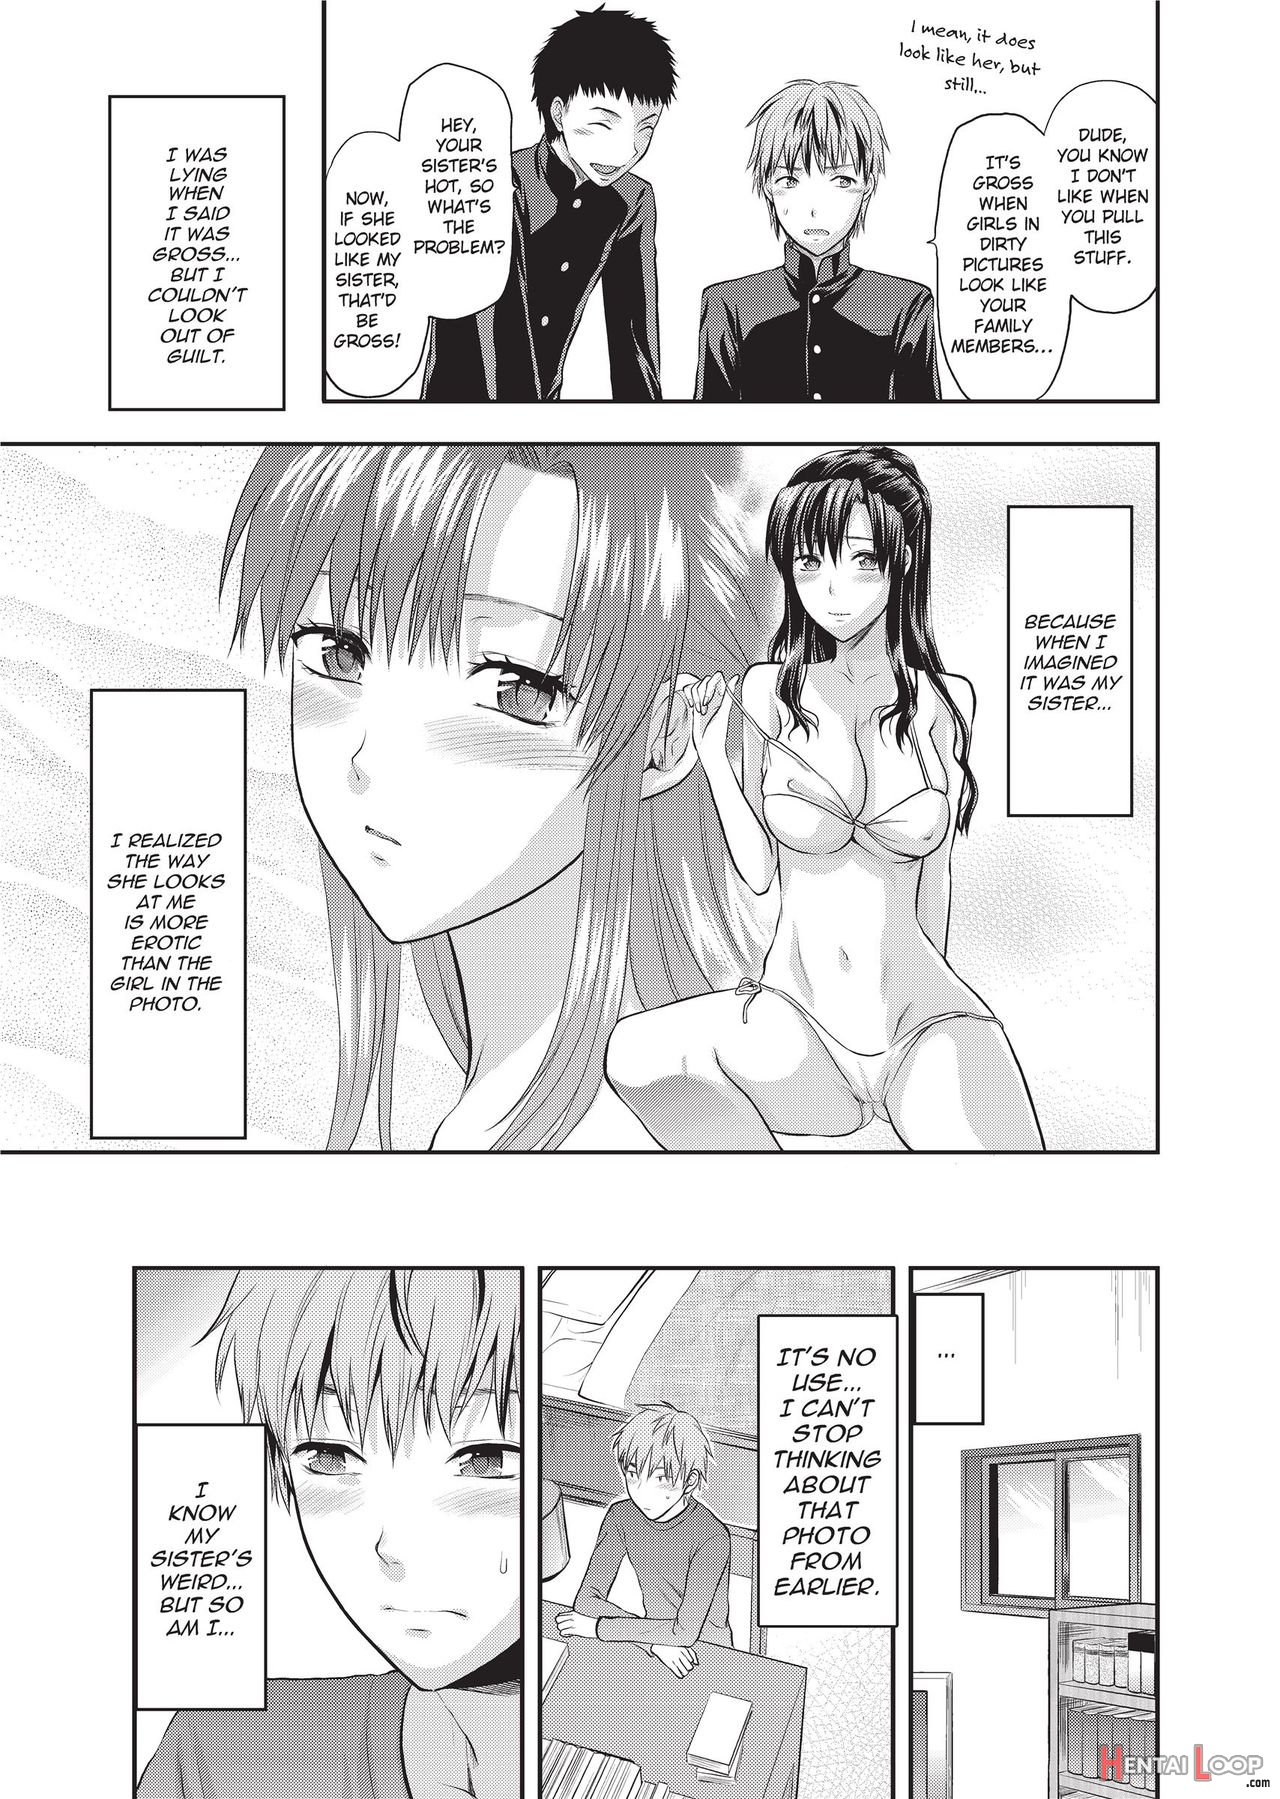 One Kore – Sweet Sister Selection page 50